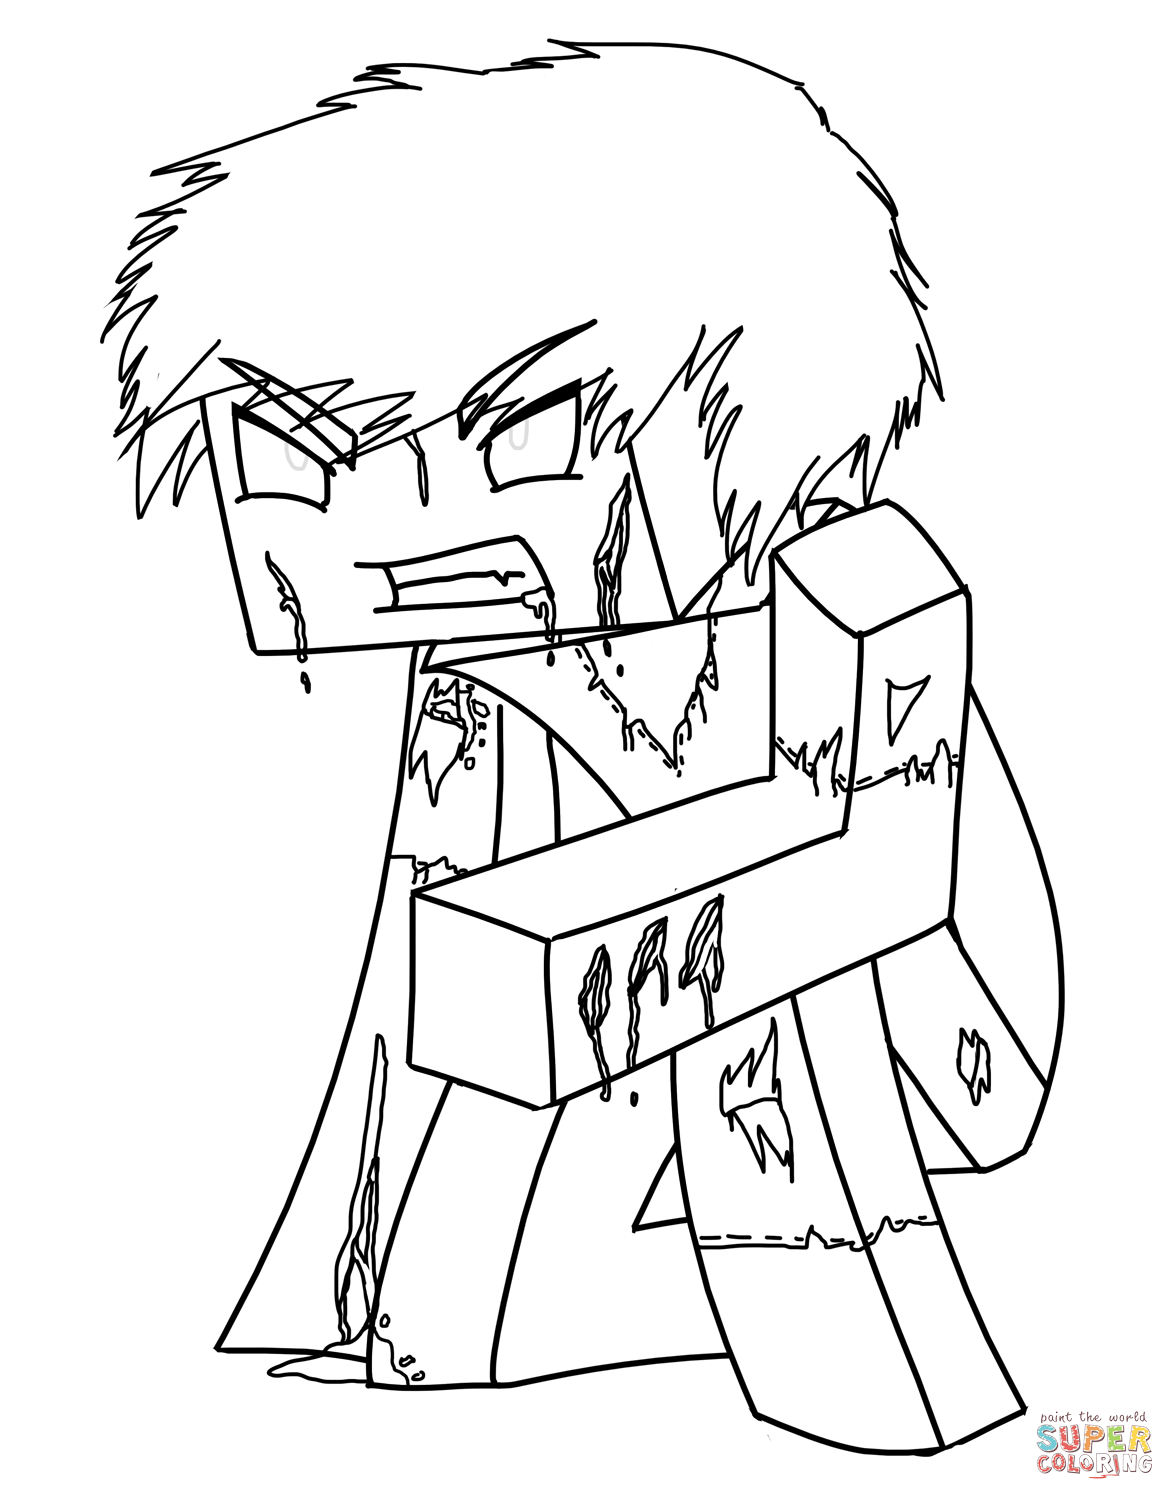 Minecraft Herobrine coloring page | Free Printable Coloring Pages